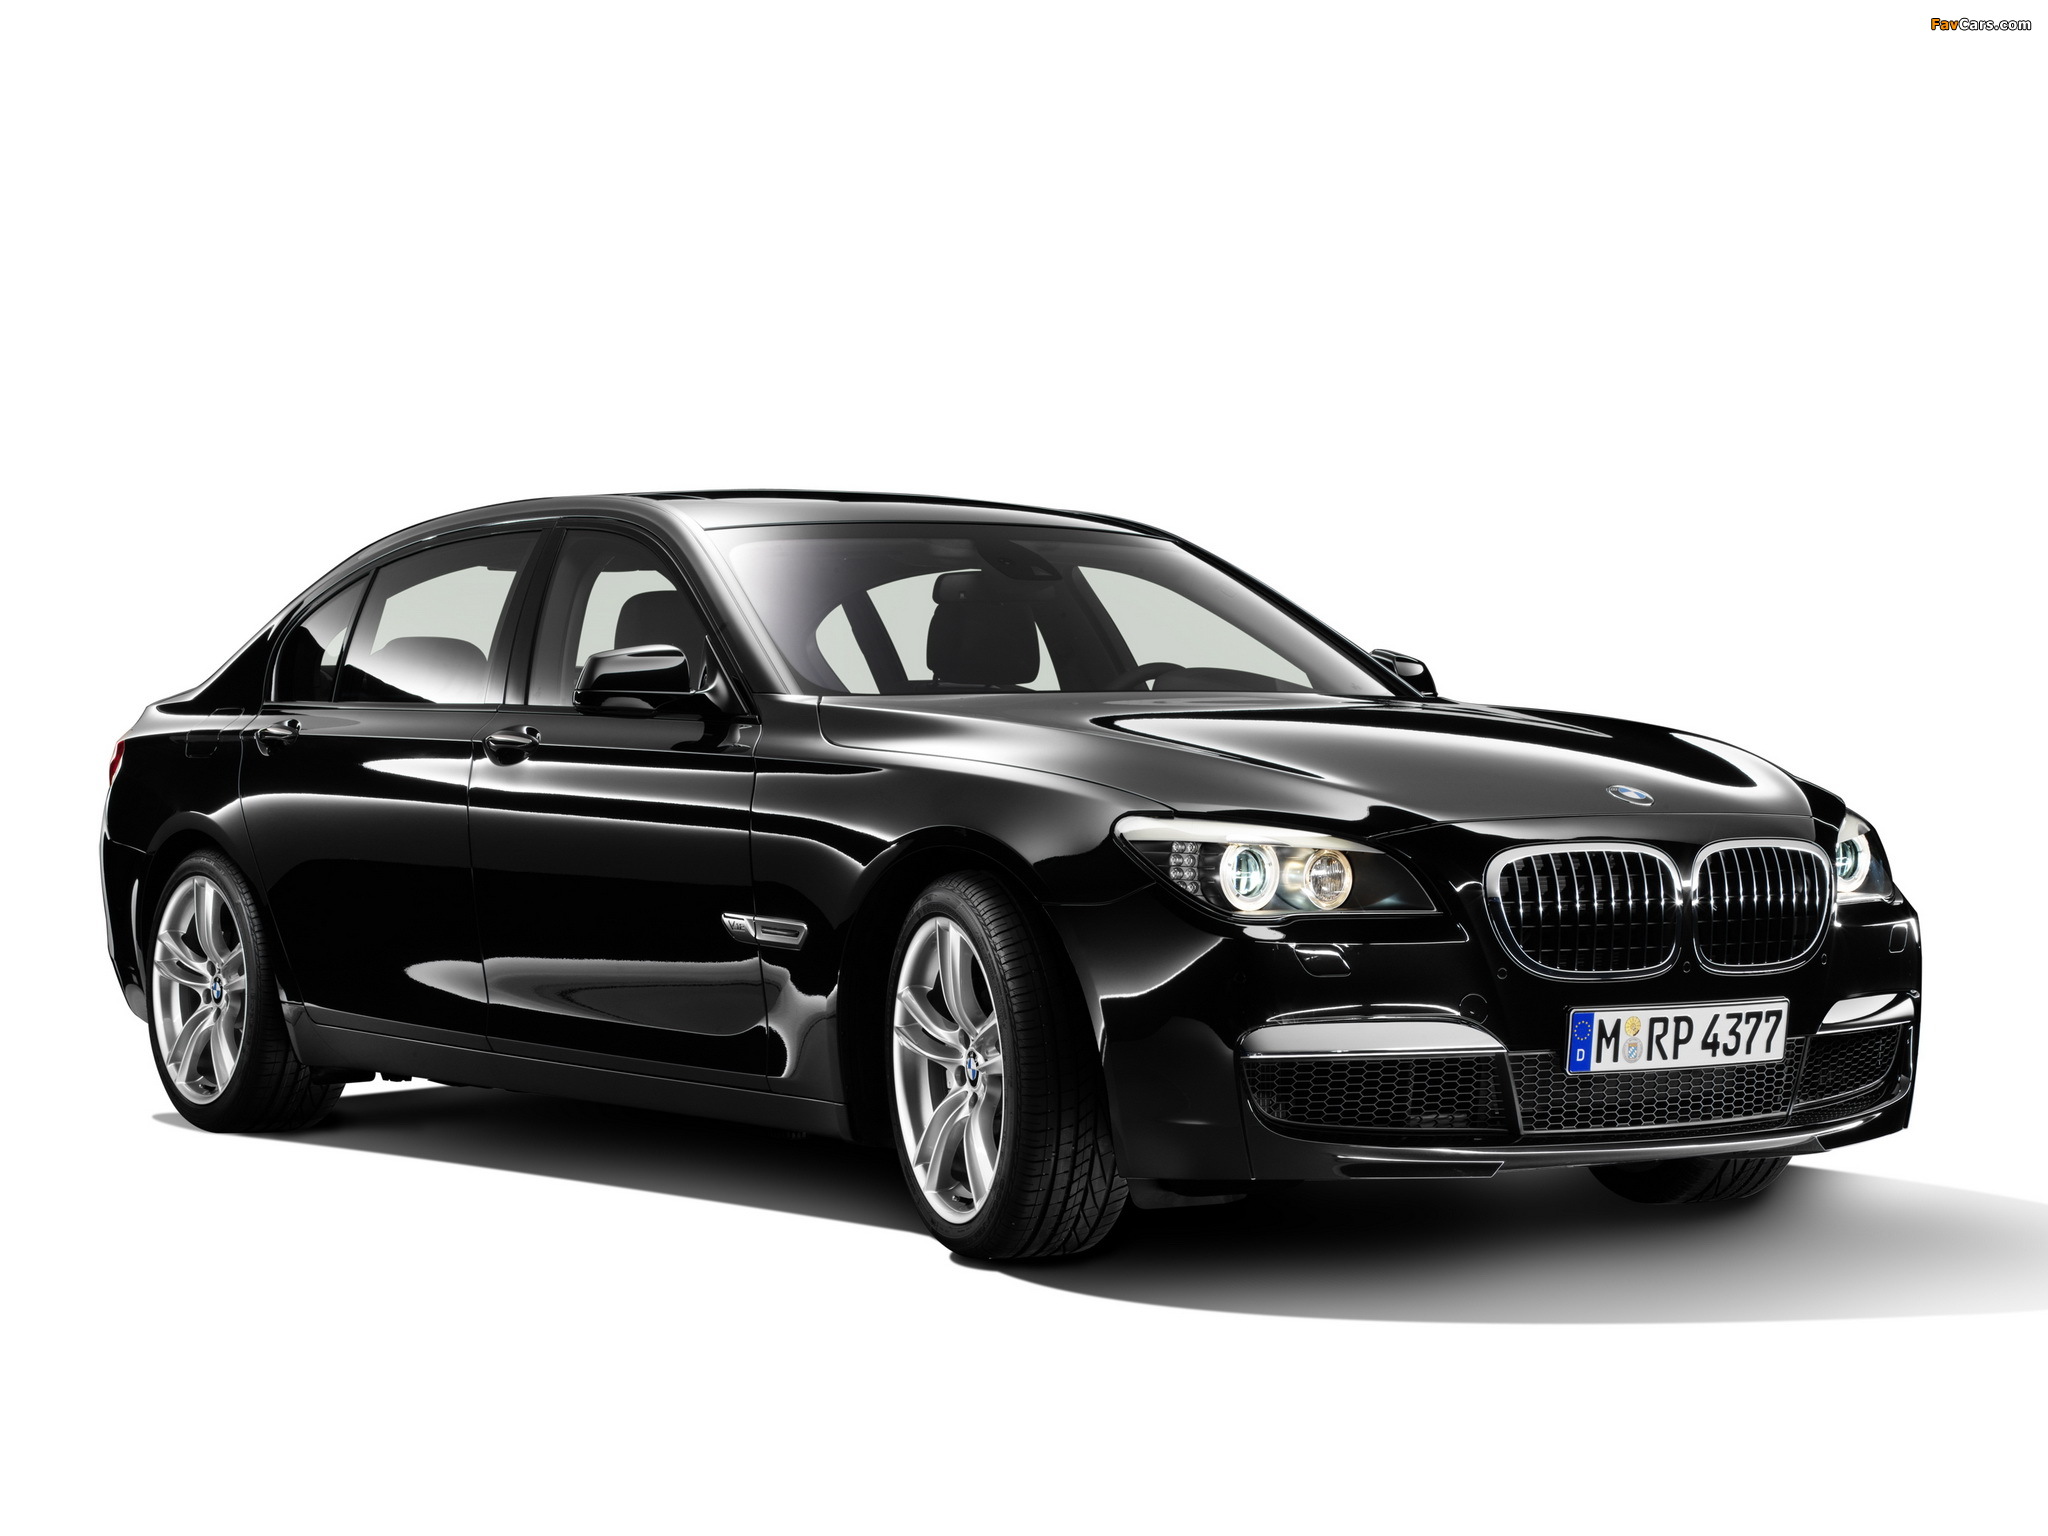 BMW 760Li M Sports Package (F02) 2009 pictures (2048 x 1536)